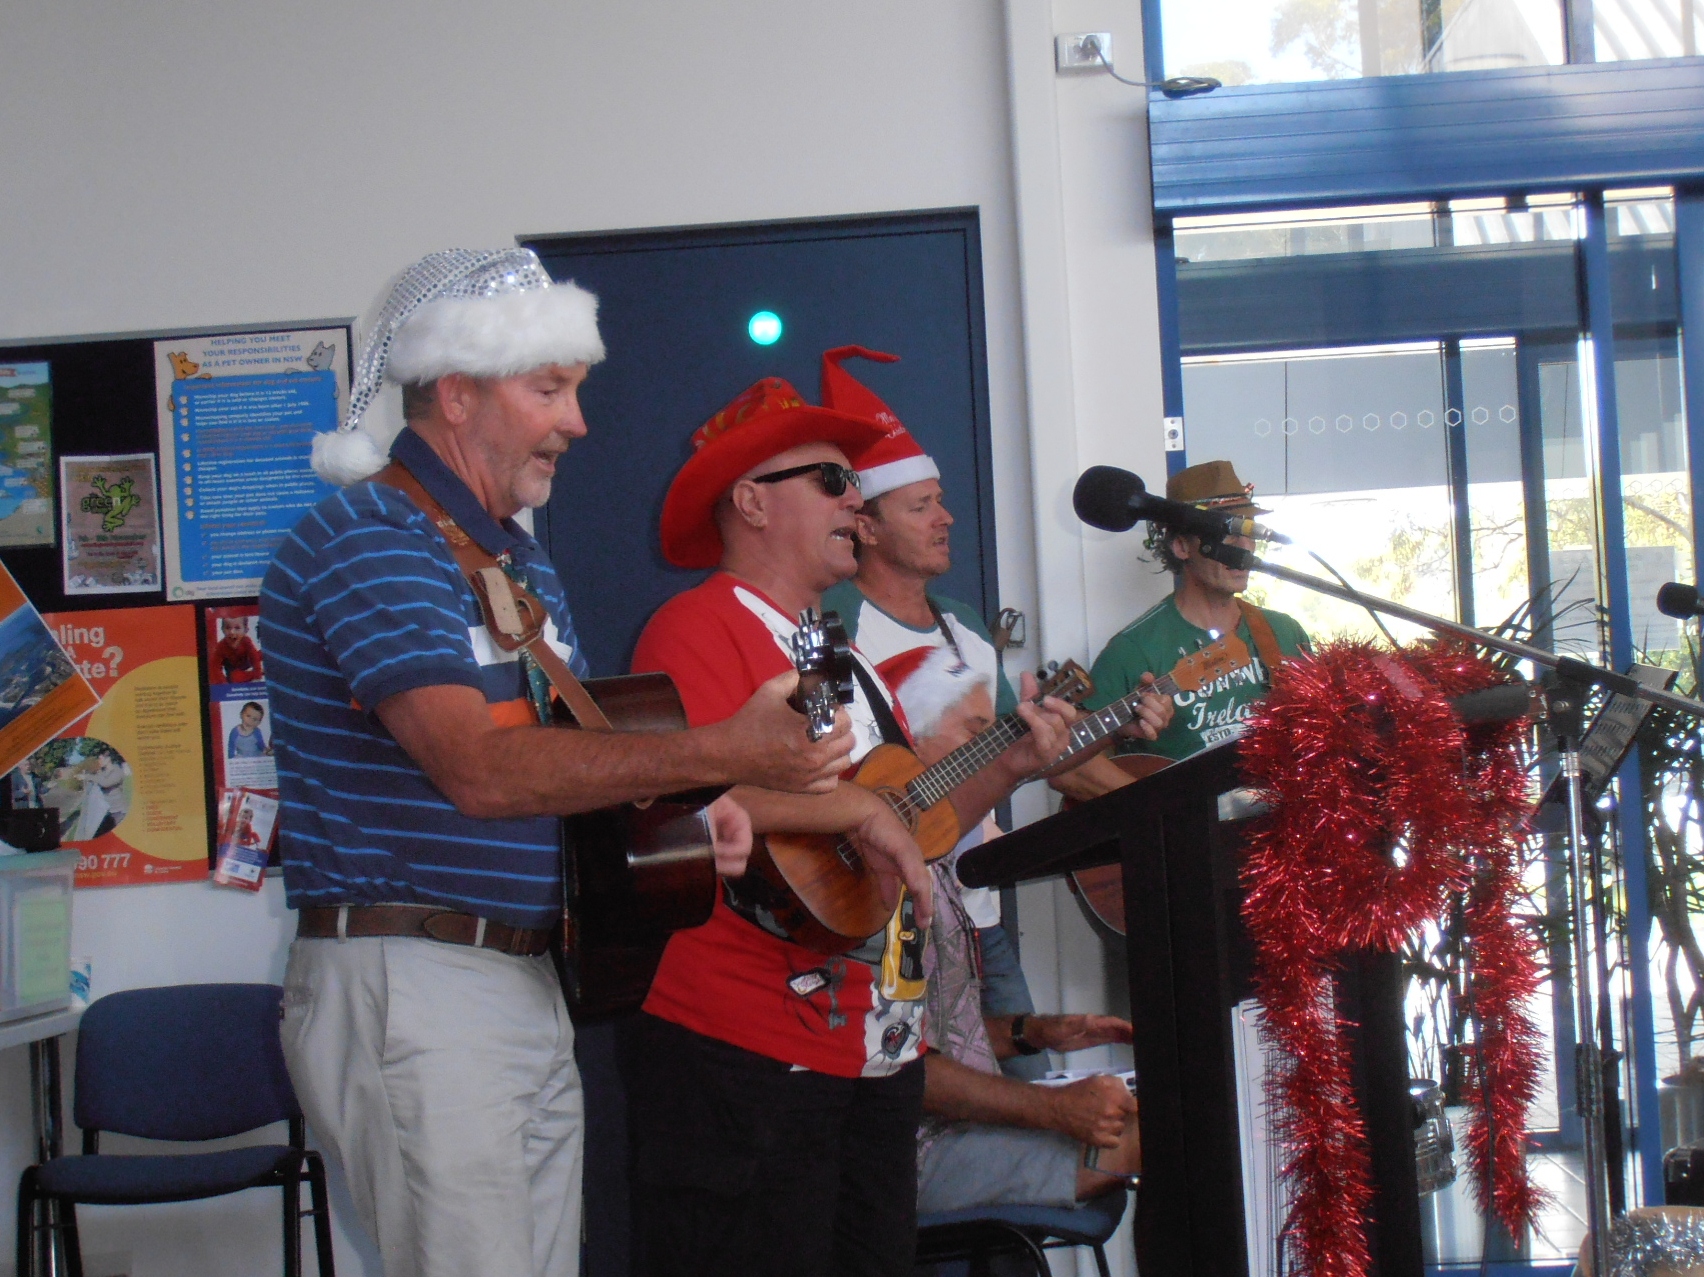 John Cavanagh, Bruno Puglisi, Marty Tooze and Steve Embry get their Christmas groove on.